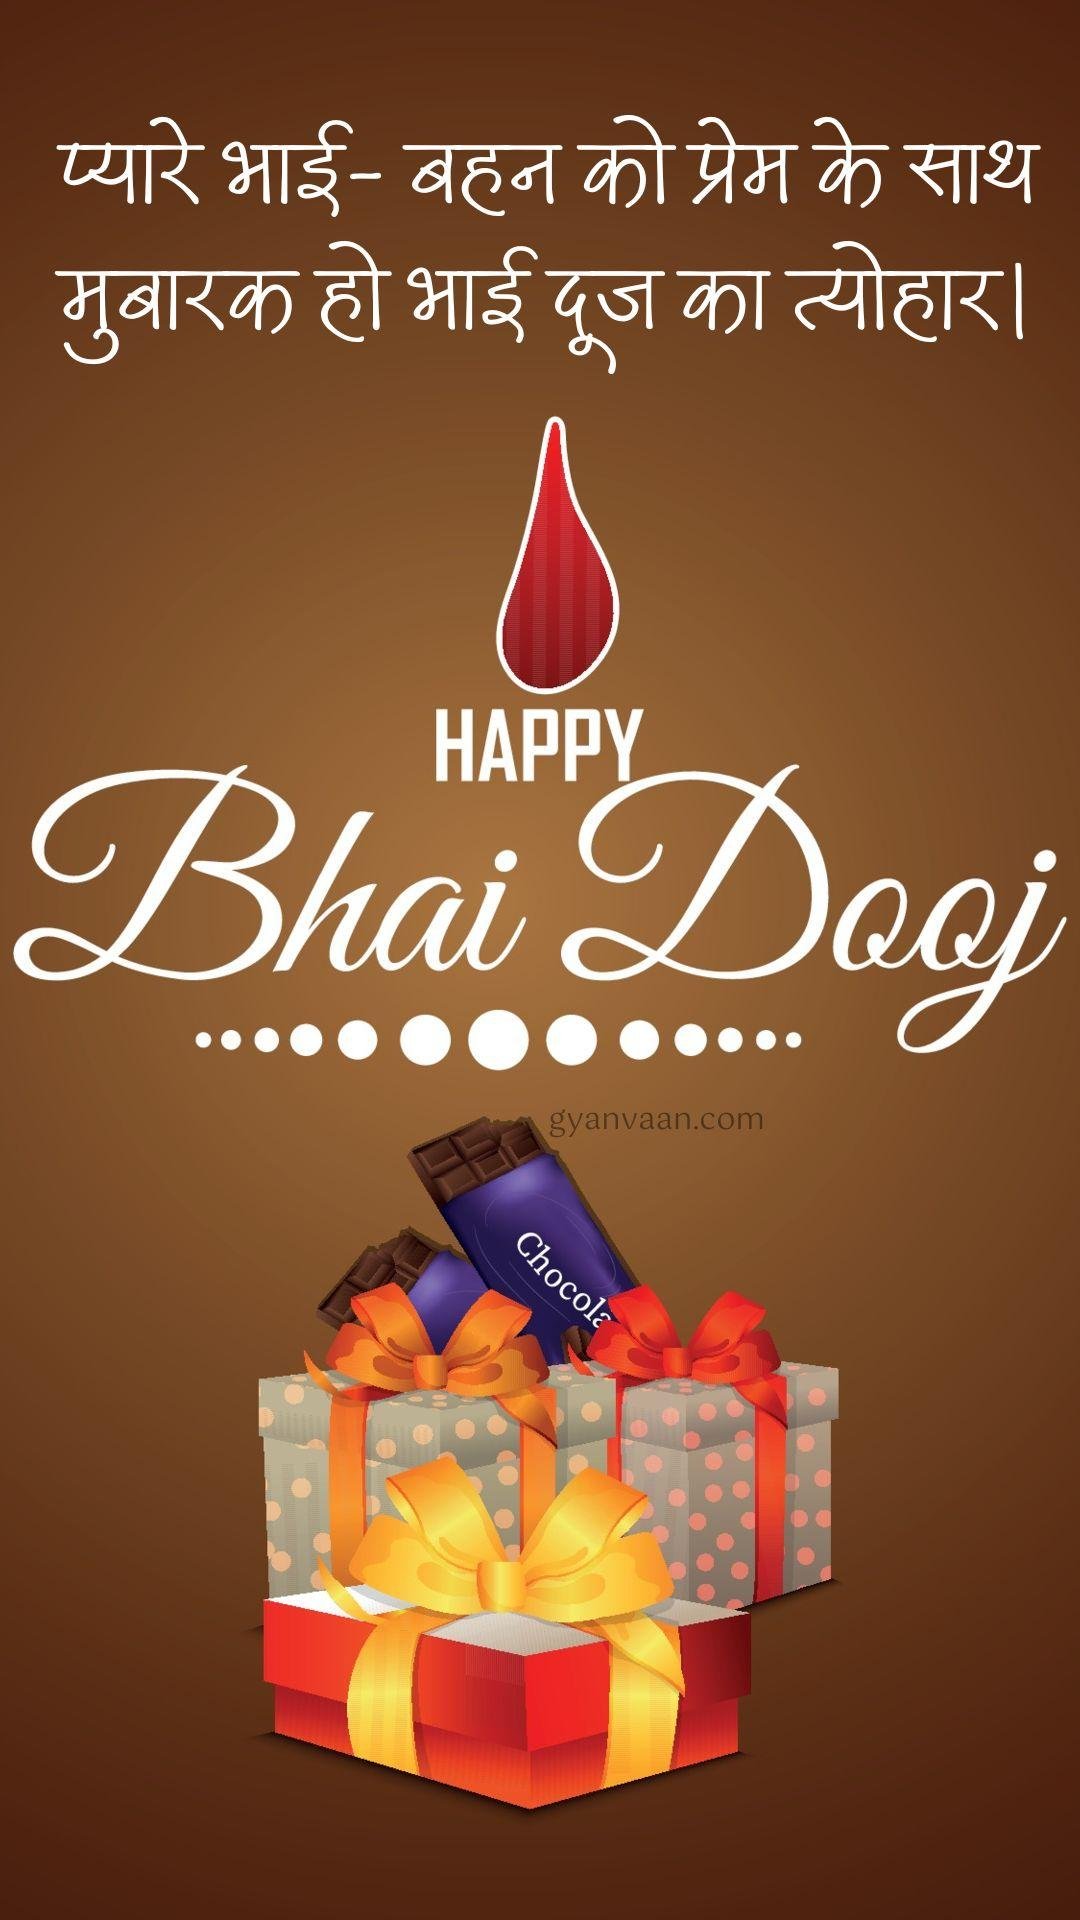 Happy Bhai Dooj Wishes In Hindi With Quotes Status Shubhkamnaye And Messages For Mobile 8 - Bhai Dooj Wishes In Hindi